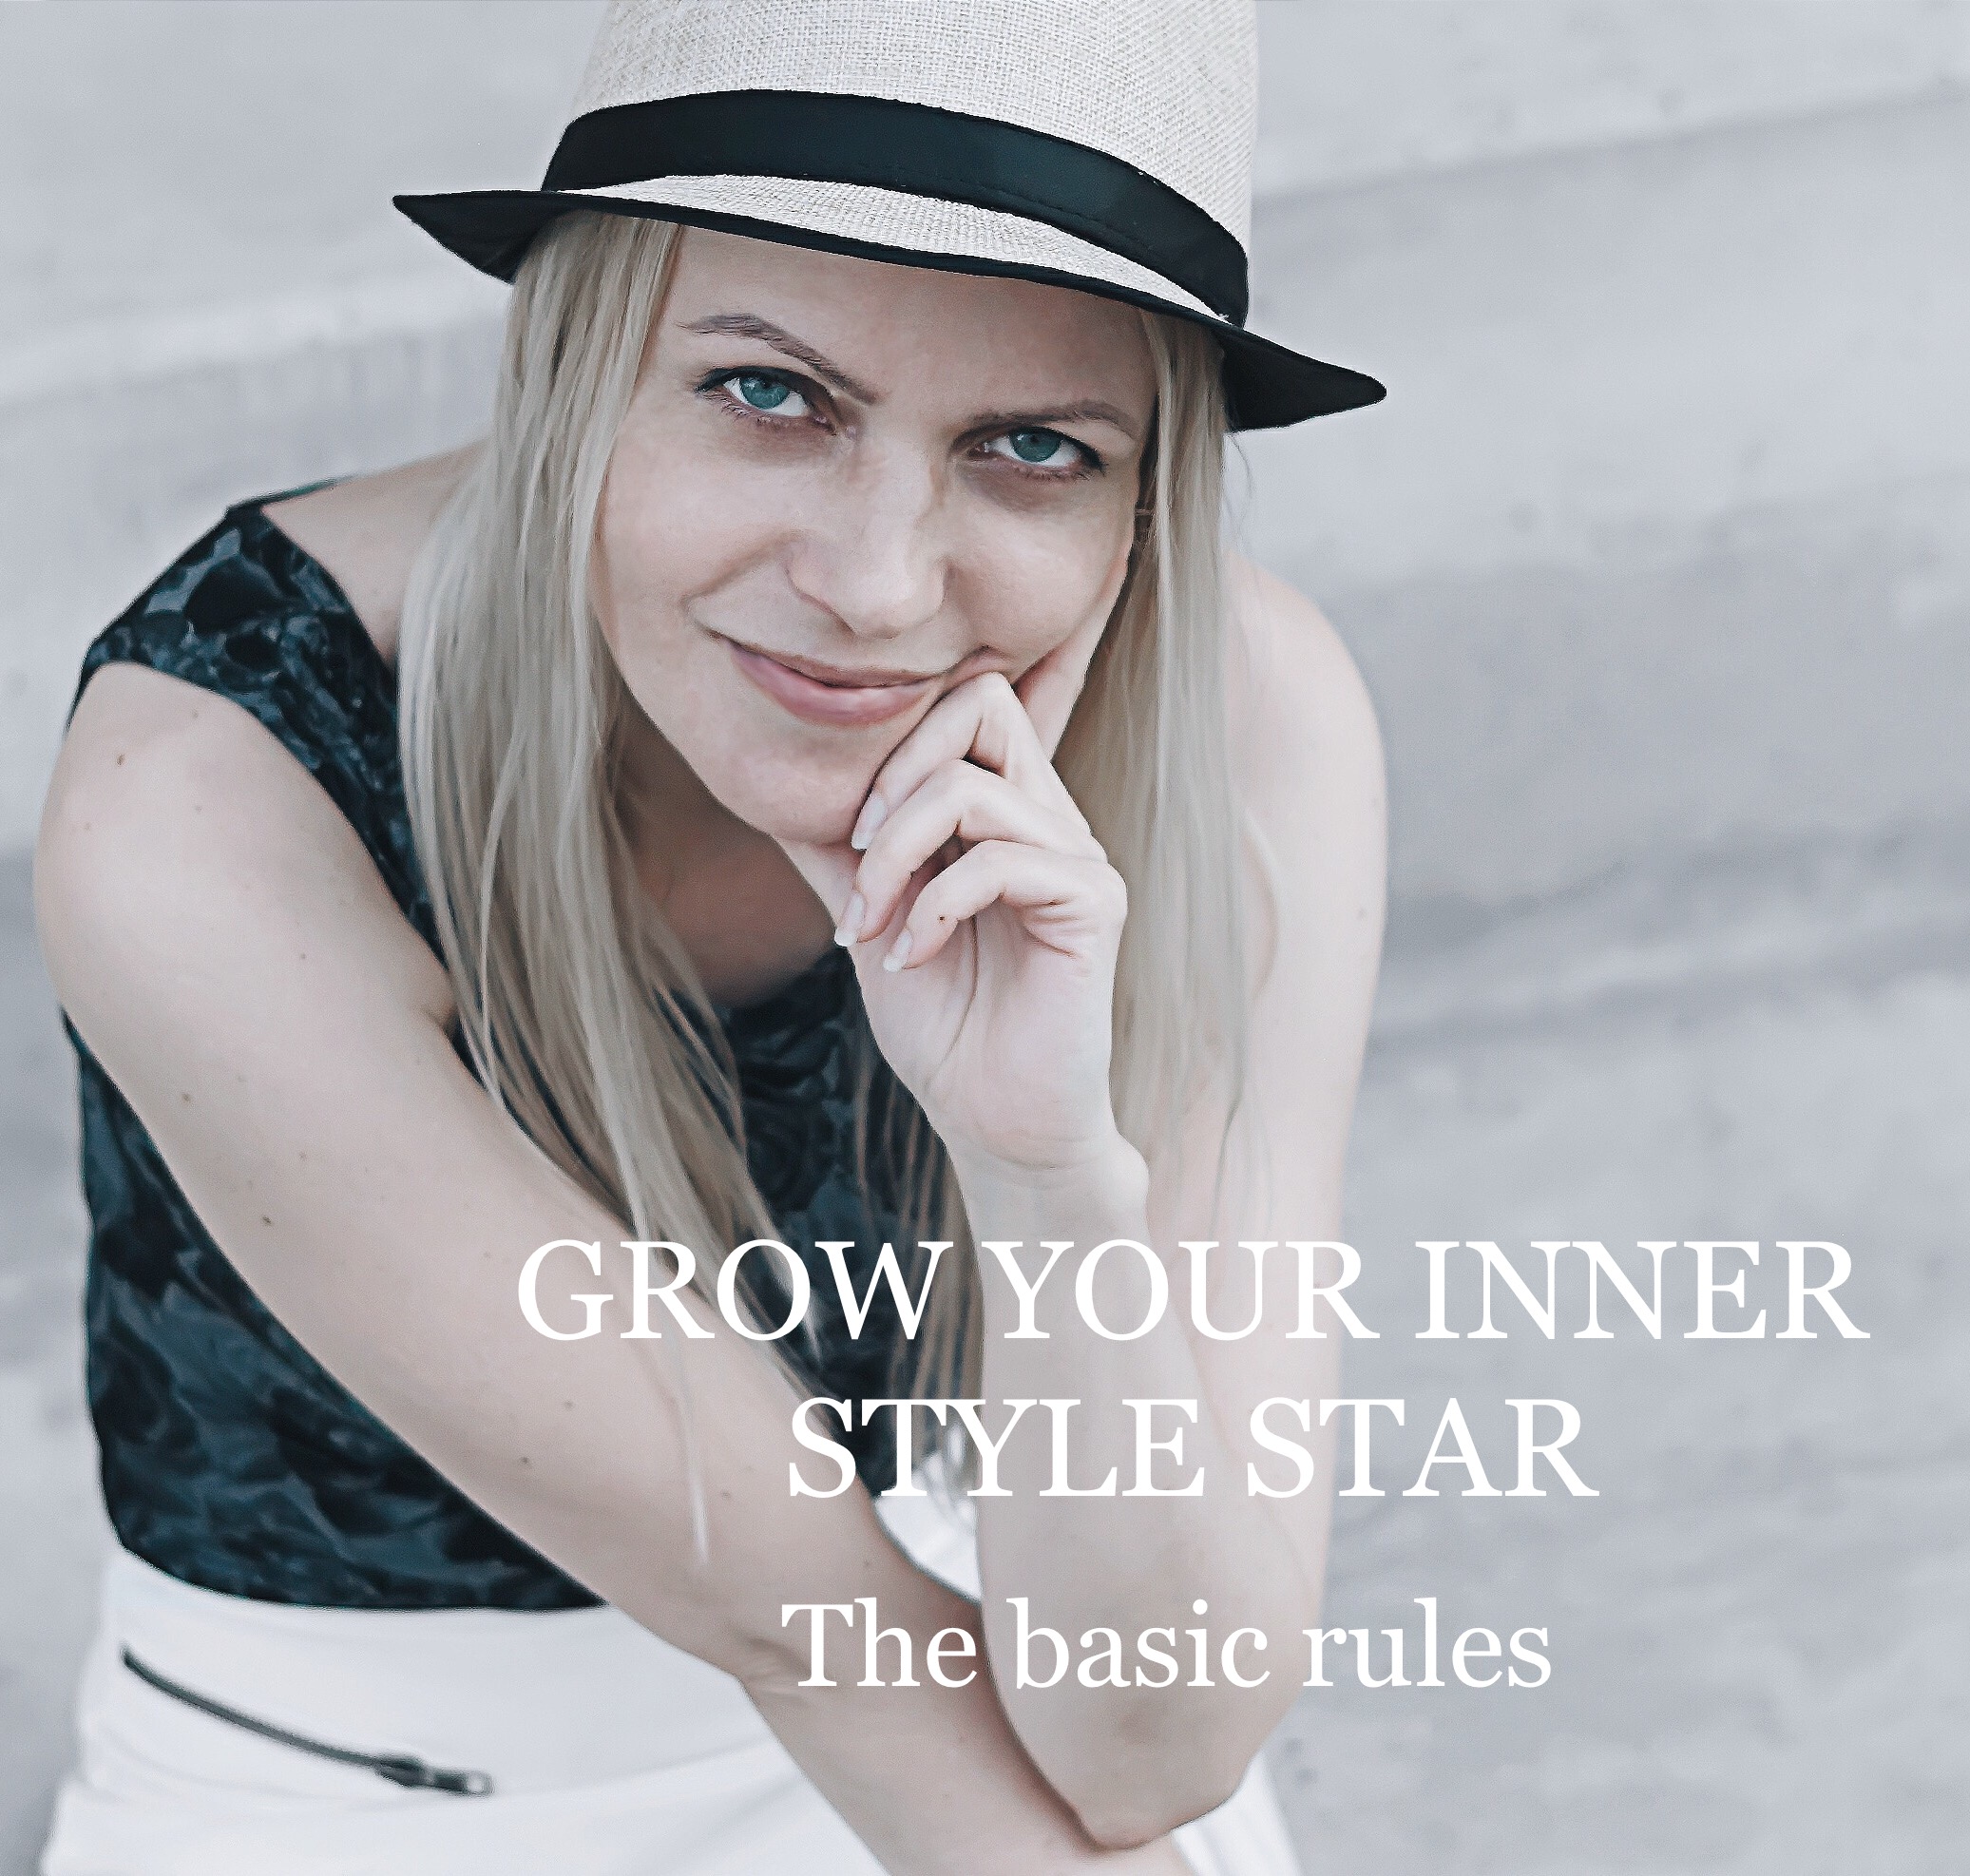 epic-street-style-epicstreetstyle-how-to-grow-your-inner-style-star